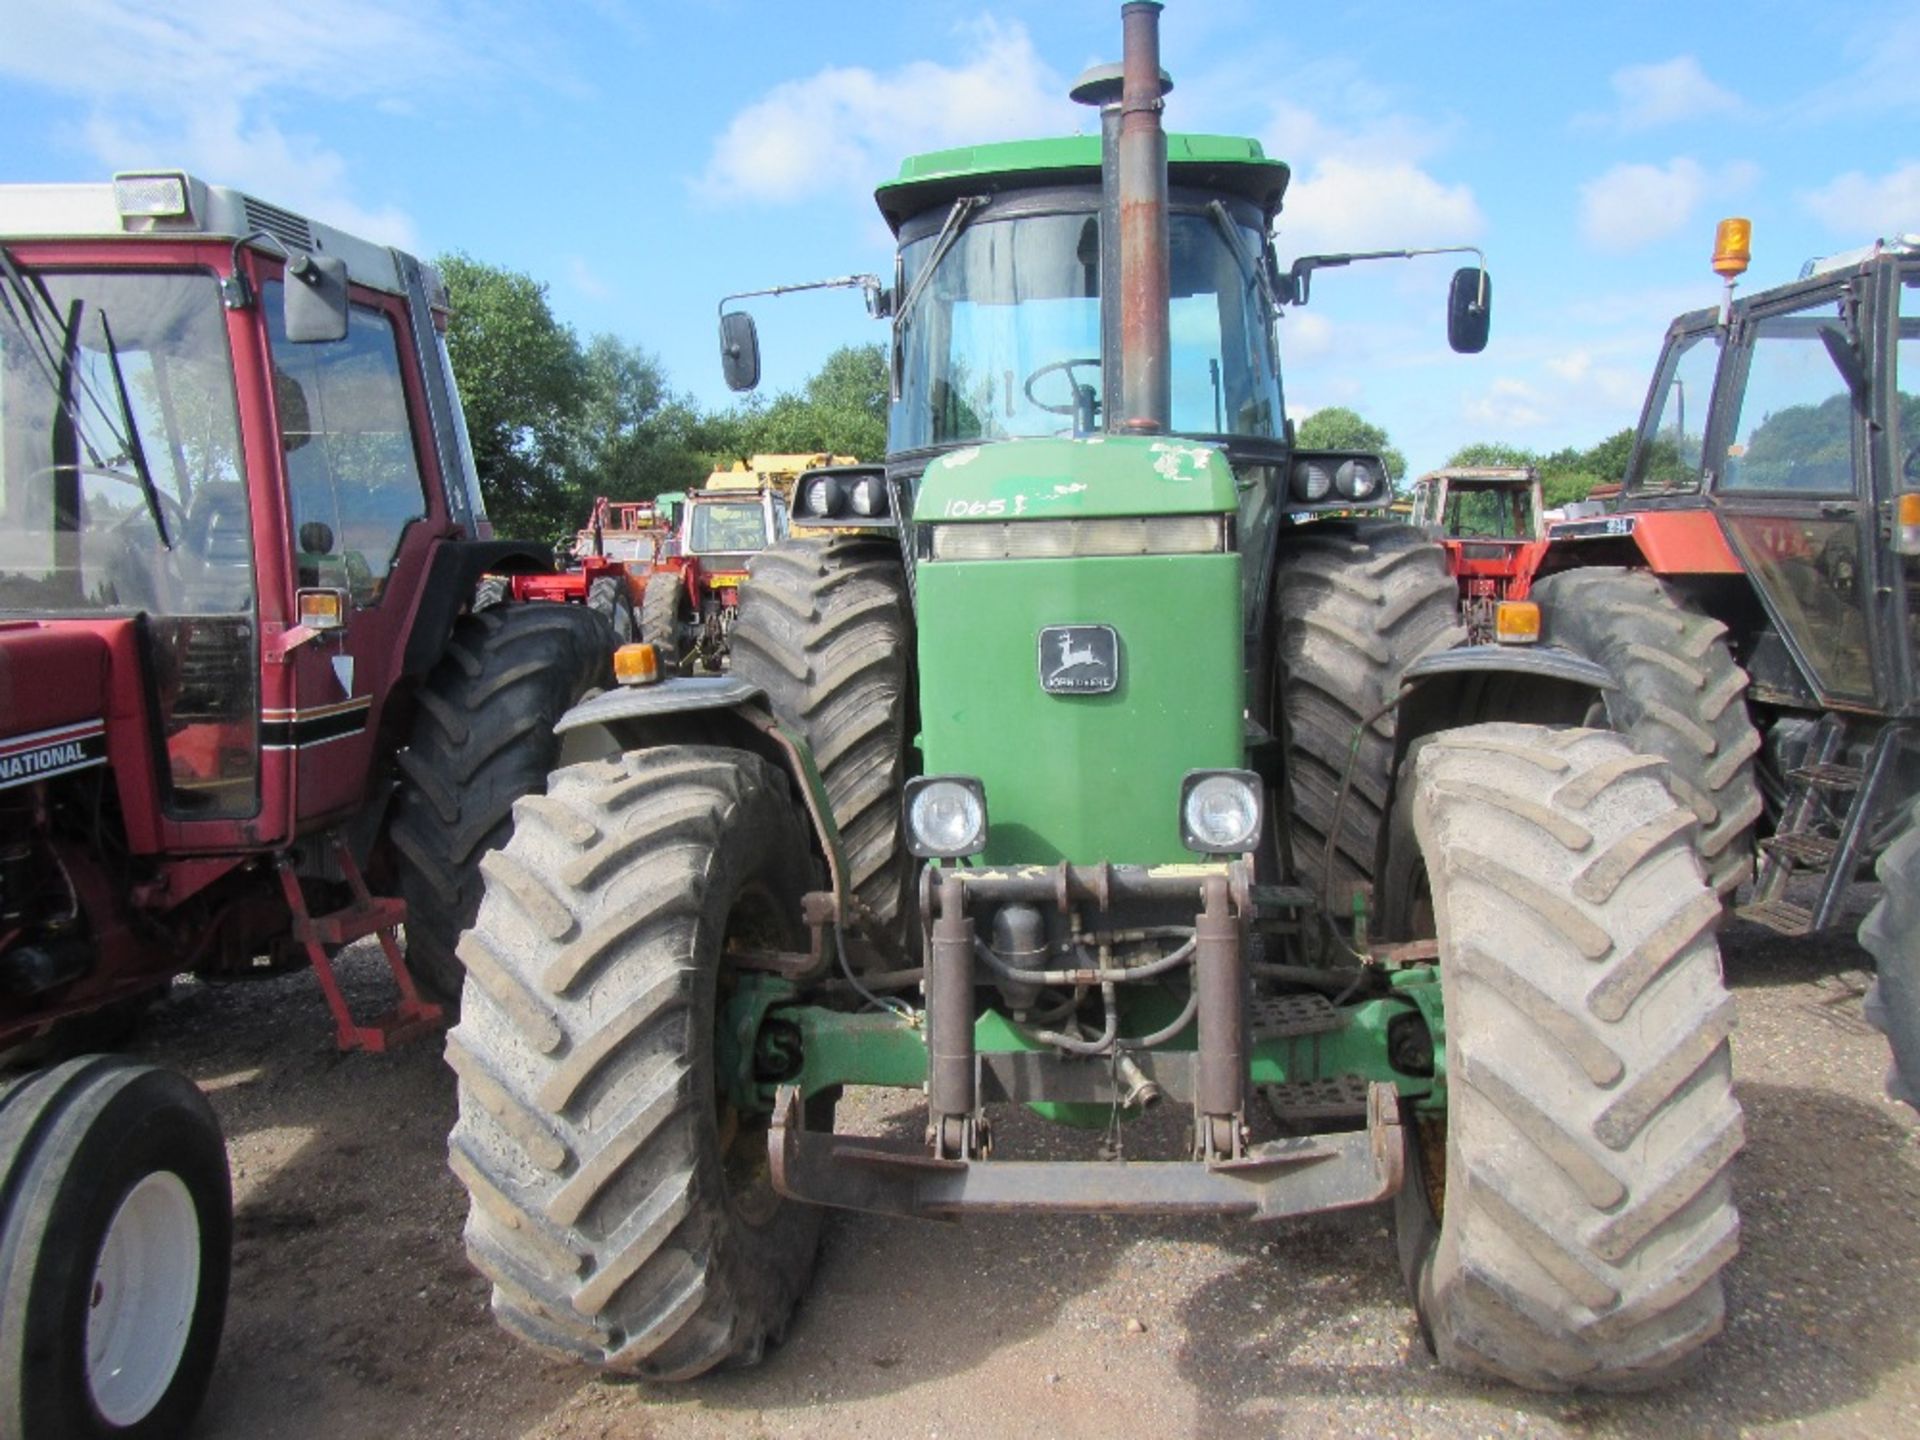 John Deere 4250 Tractor. 1st Regd 19/1/88. V5 has been applied for. Ser. No. RW4250E013056 - Image 2 of 16